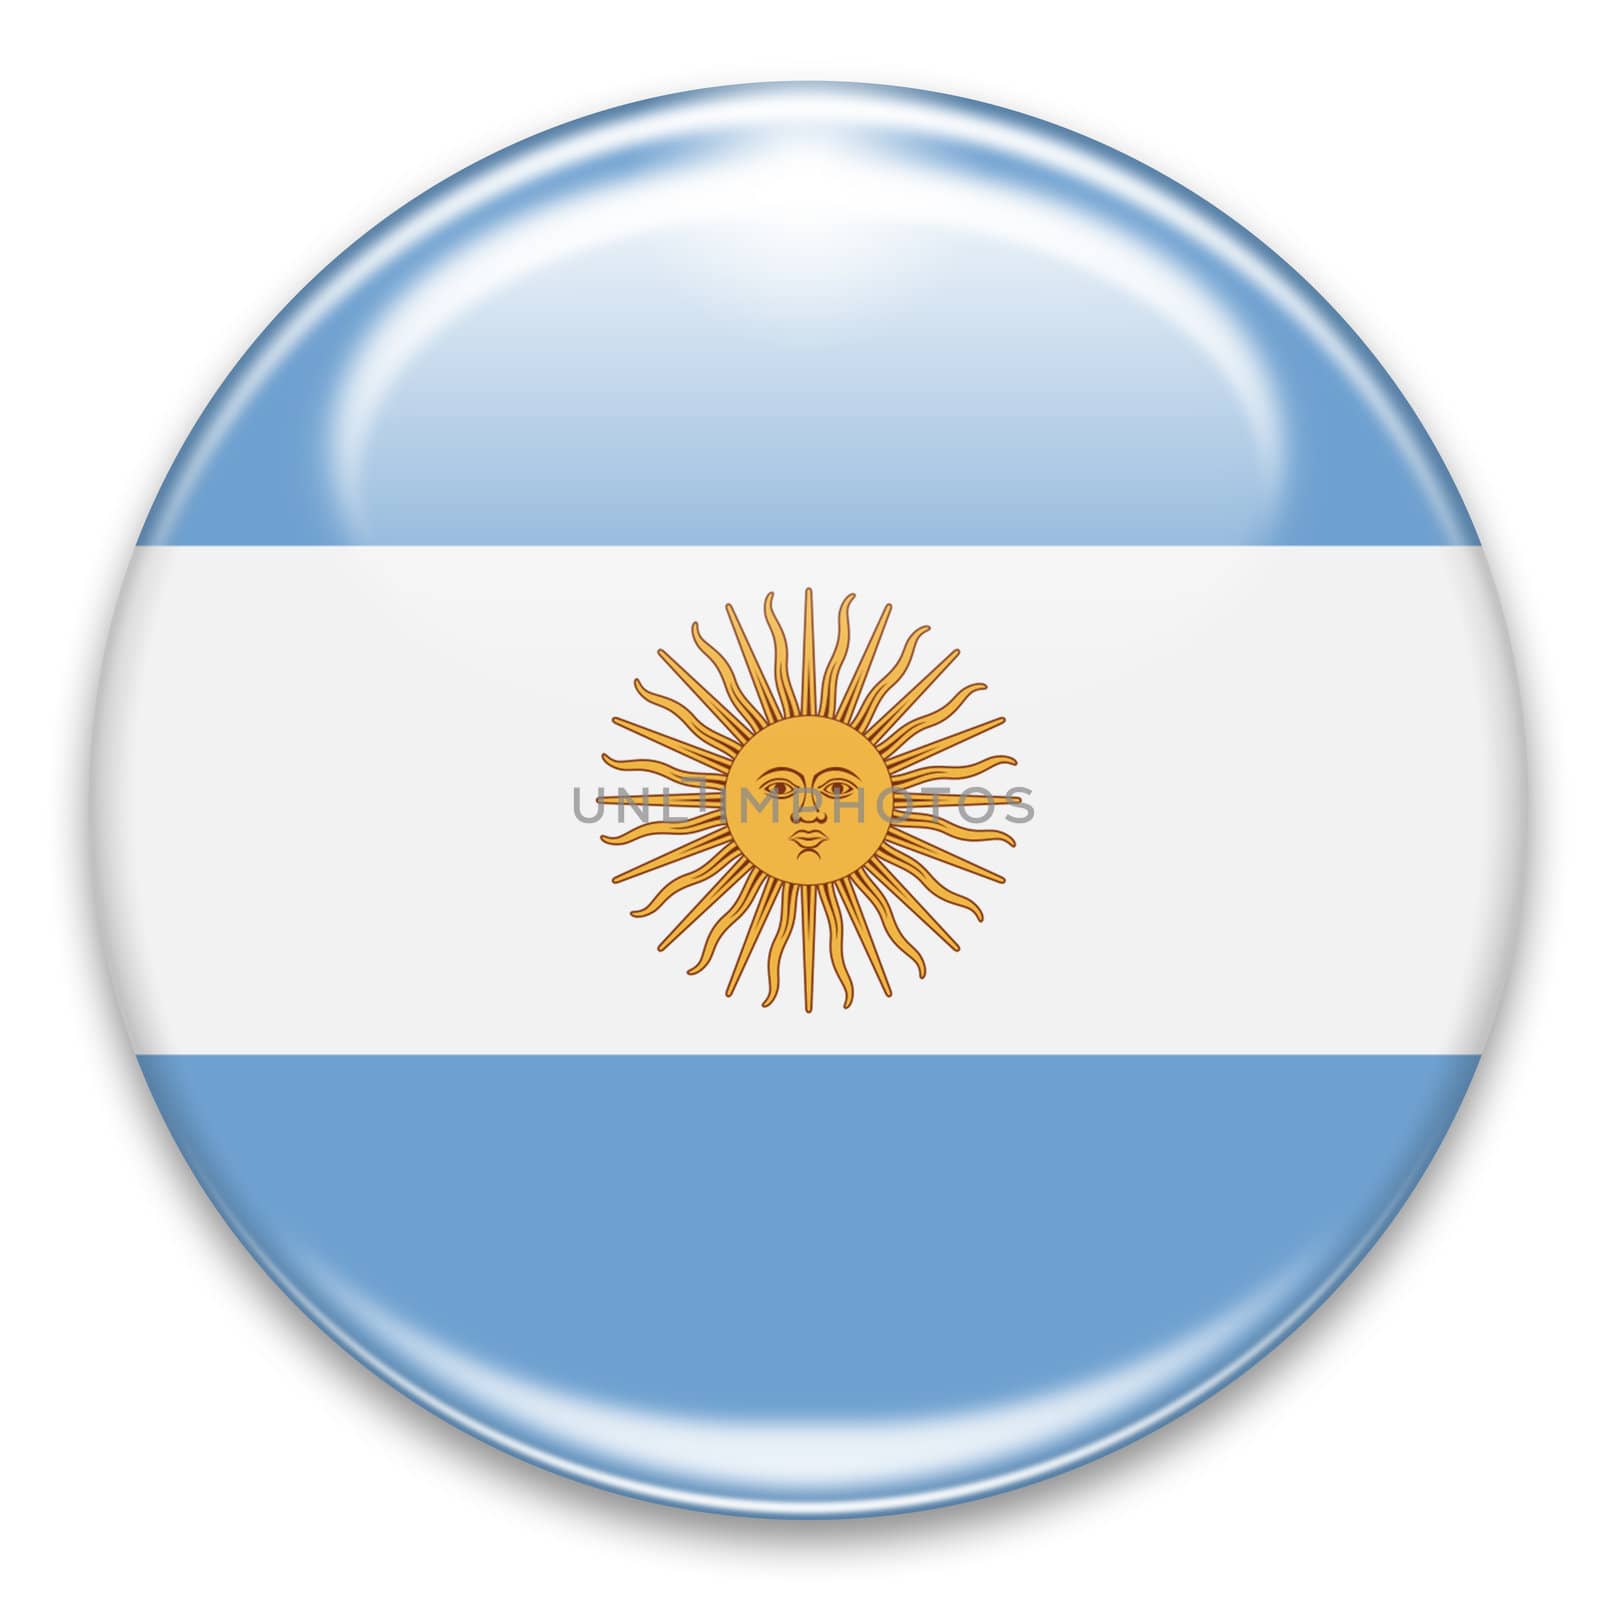 argentinian flag button isolated on white